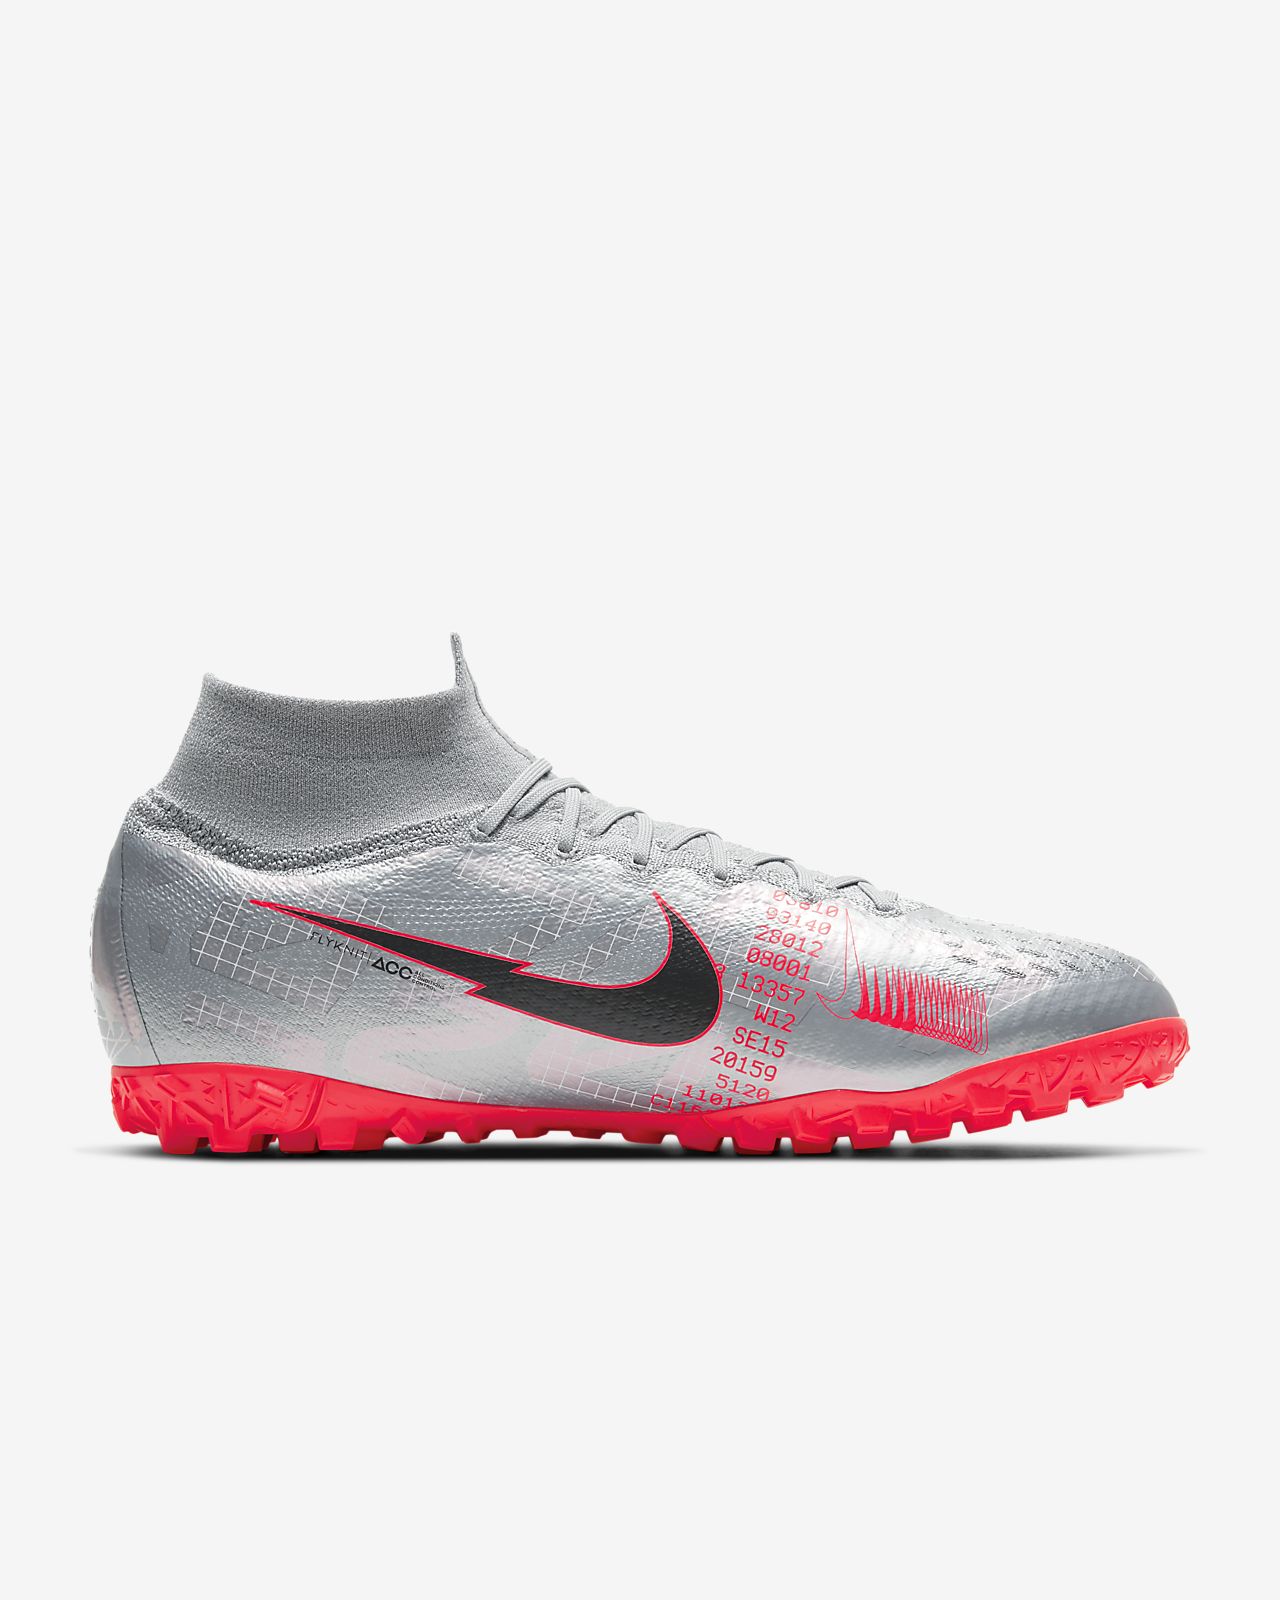 Football for constellation Nike Mercurial Superfly 7 Pro MDS.